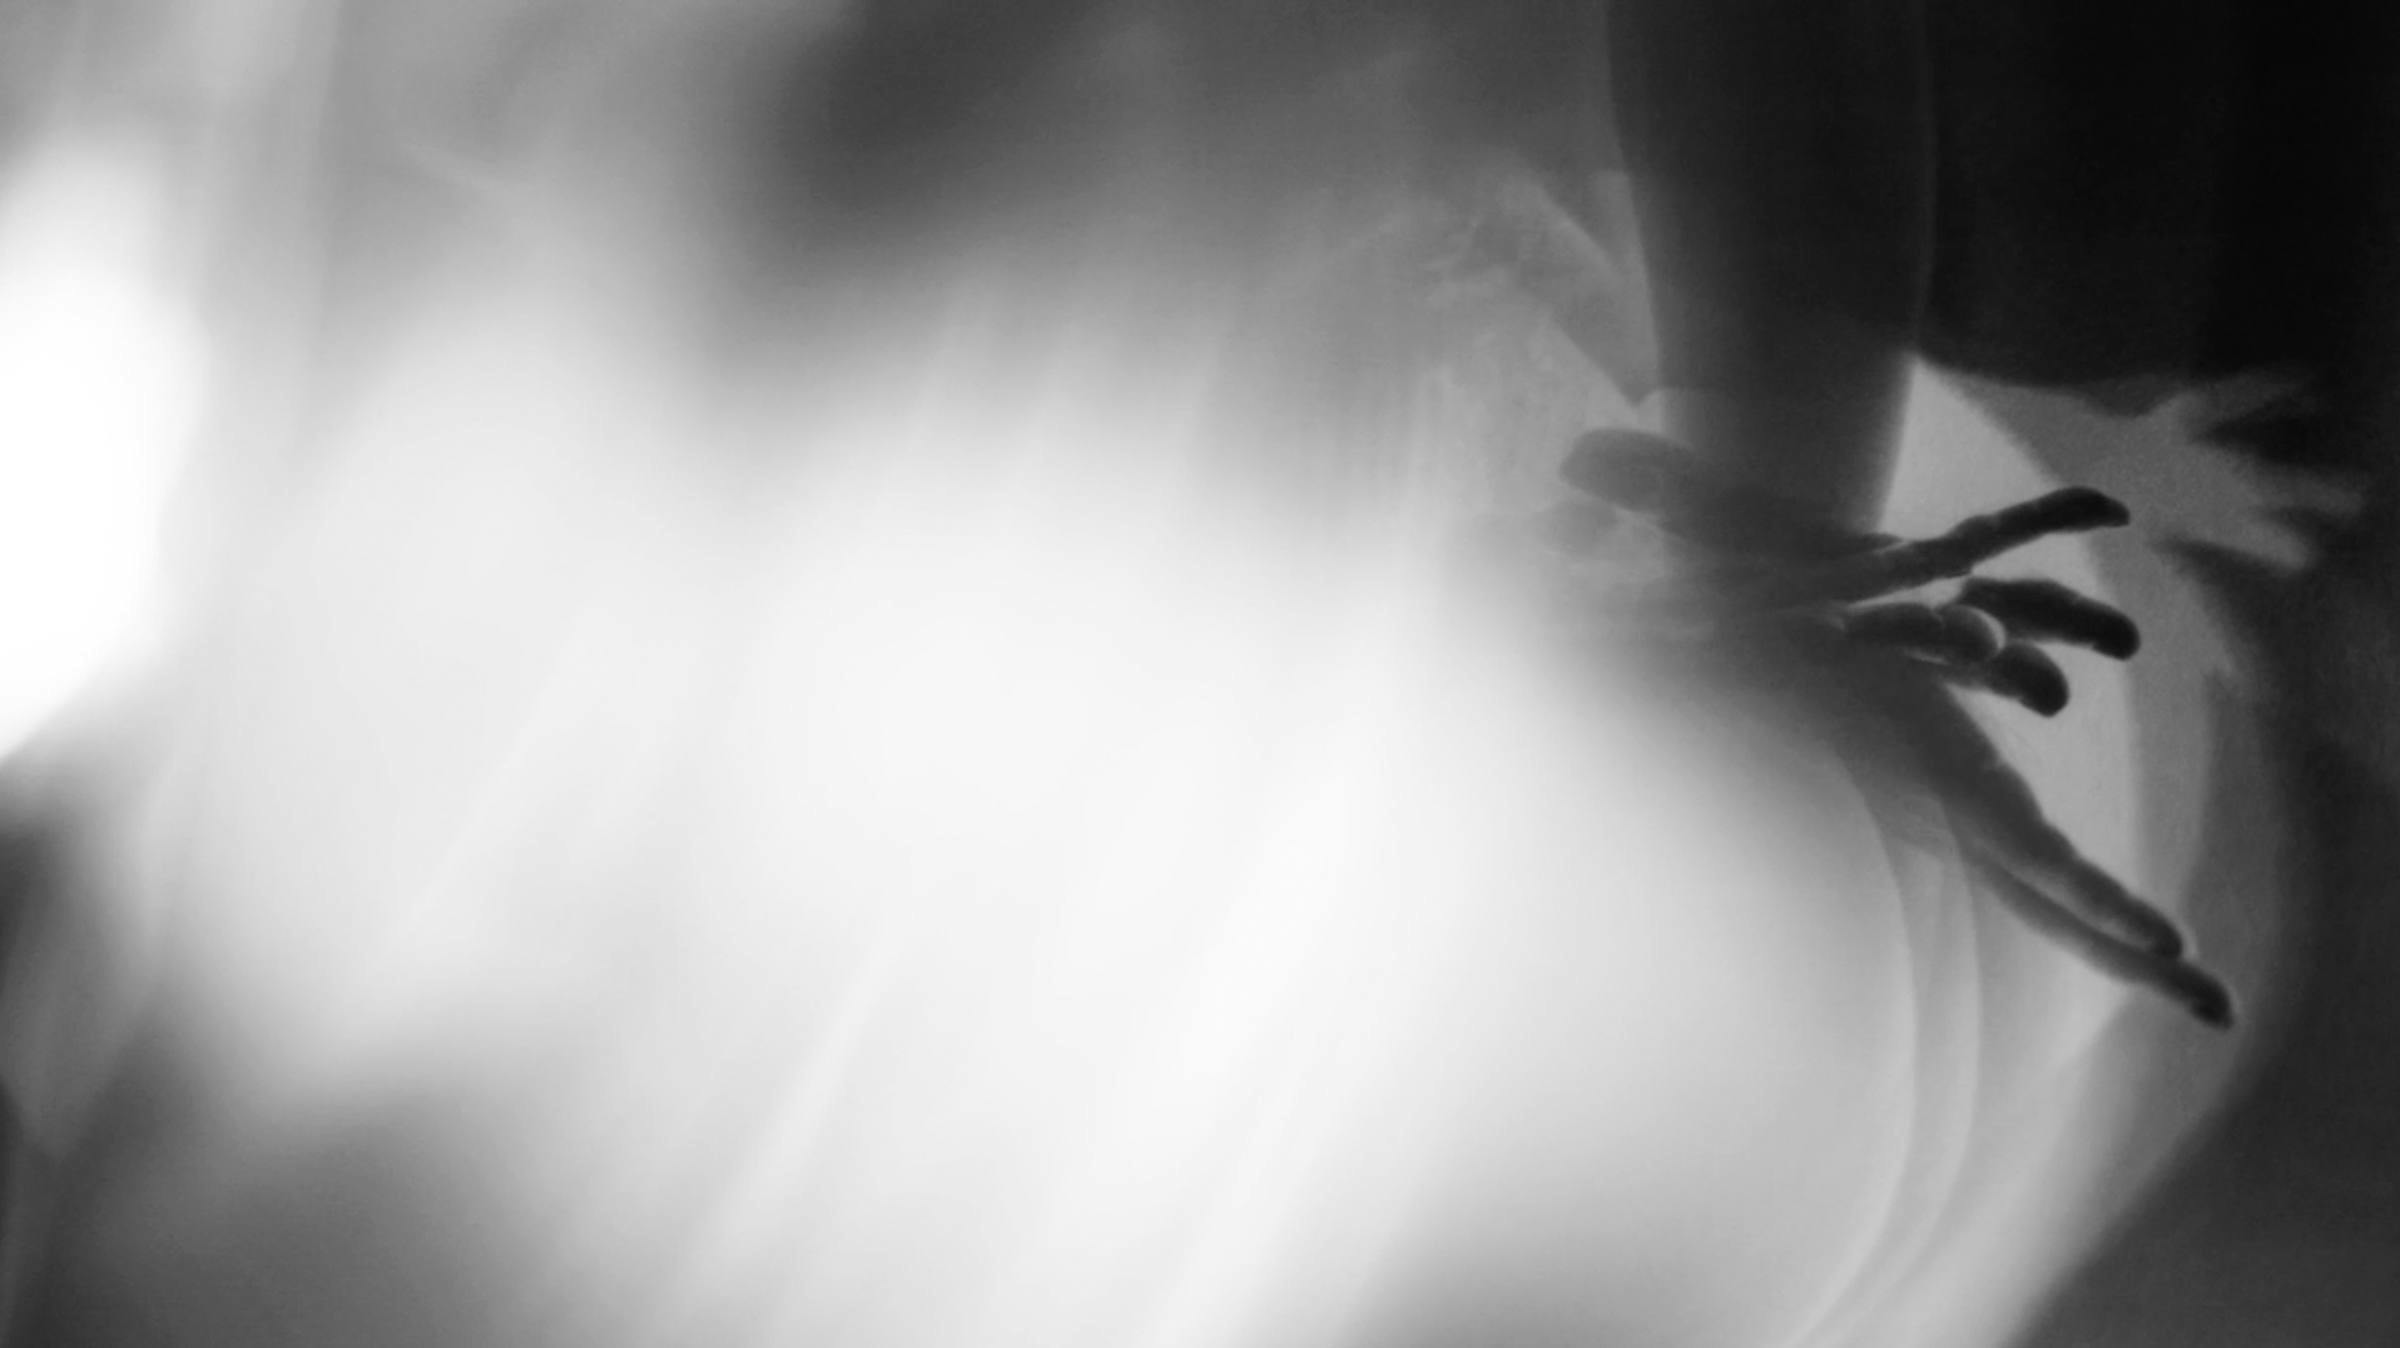 Black and white image with abstract forms and glowy white light.